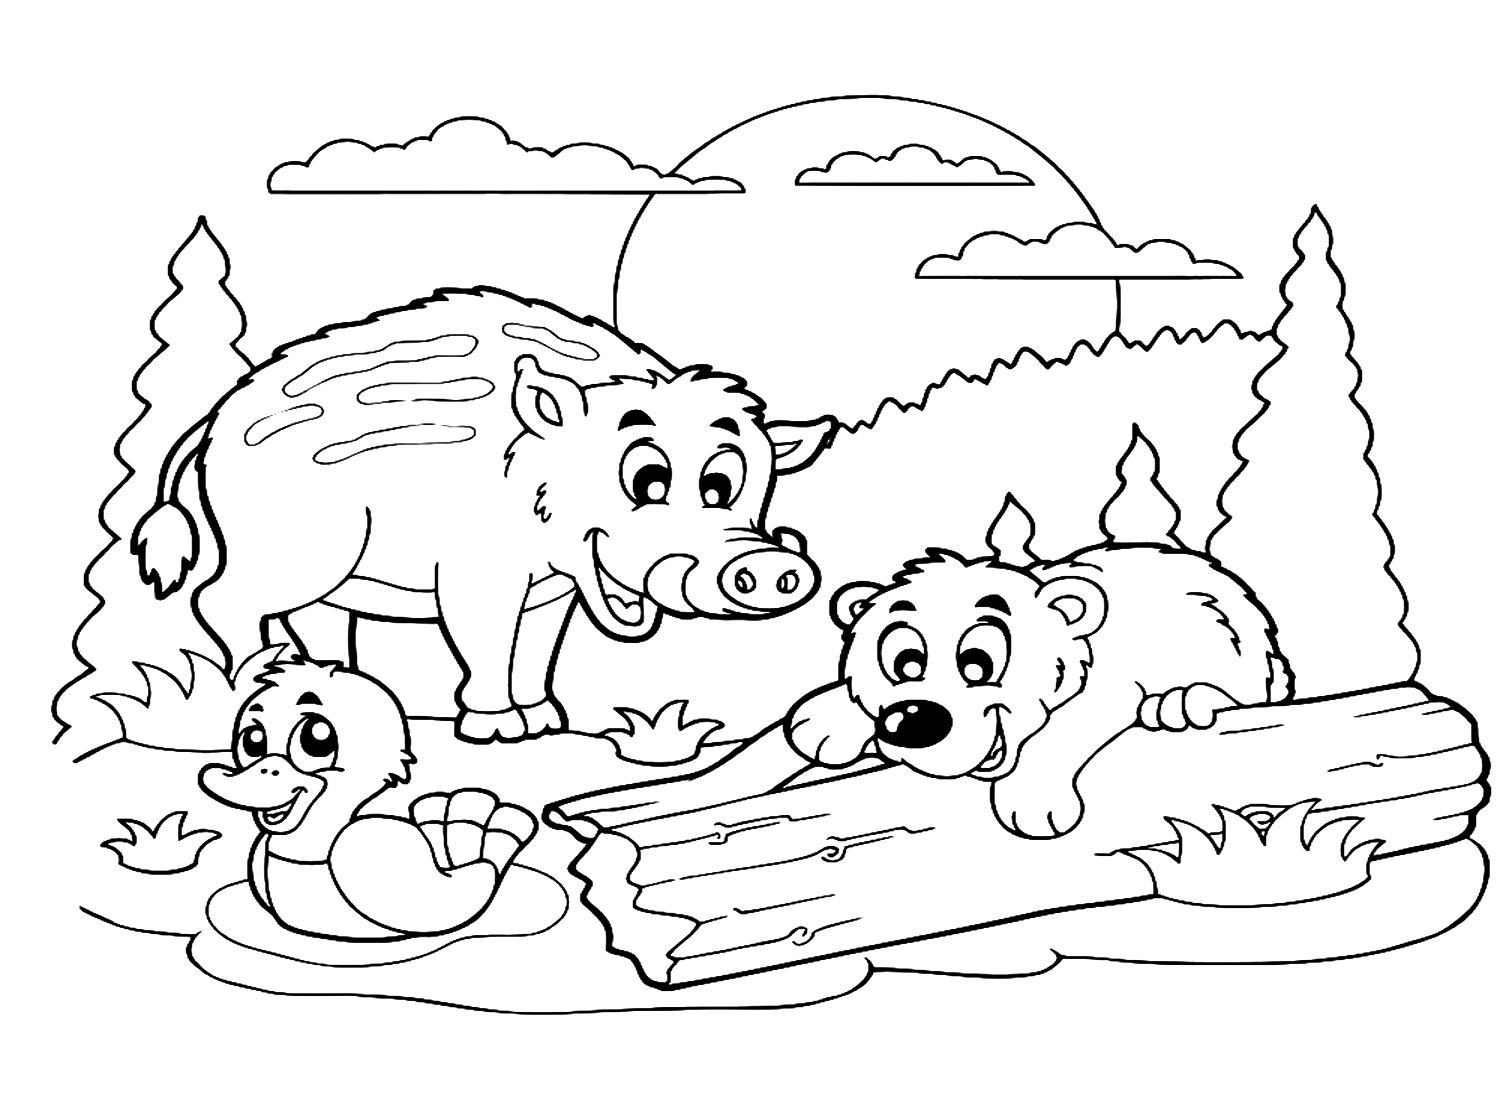 Boar With Happy Animals from Boar